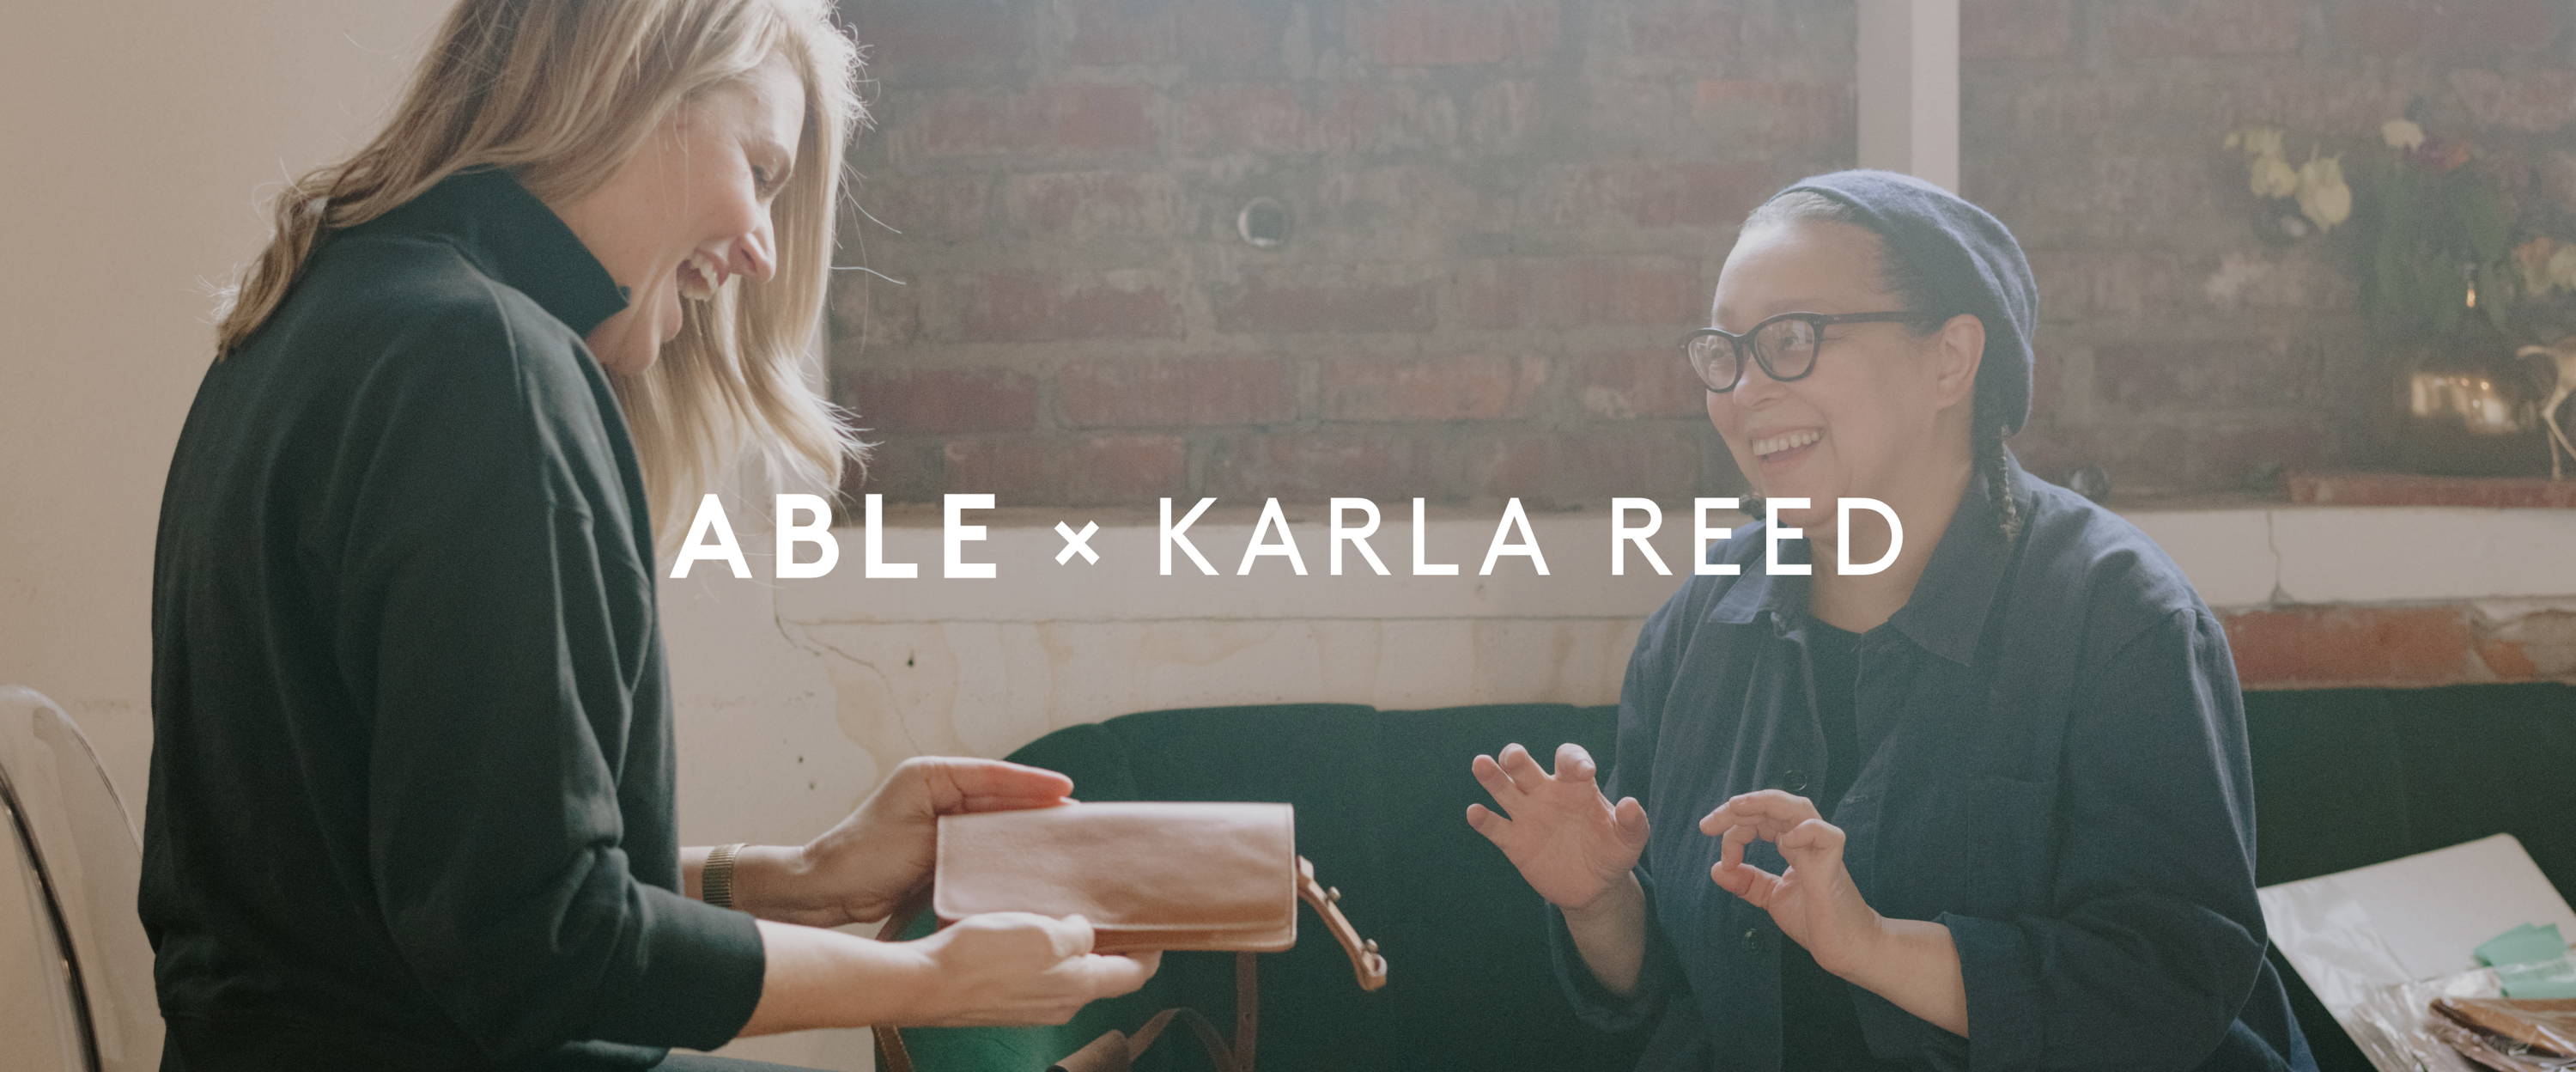 ABLE x Karla Reed